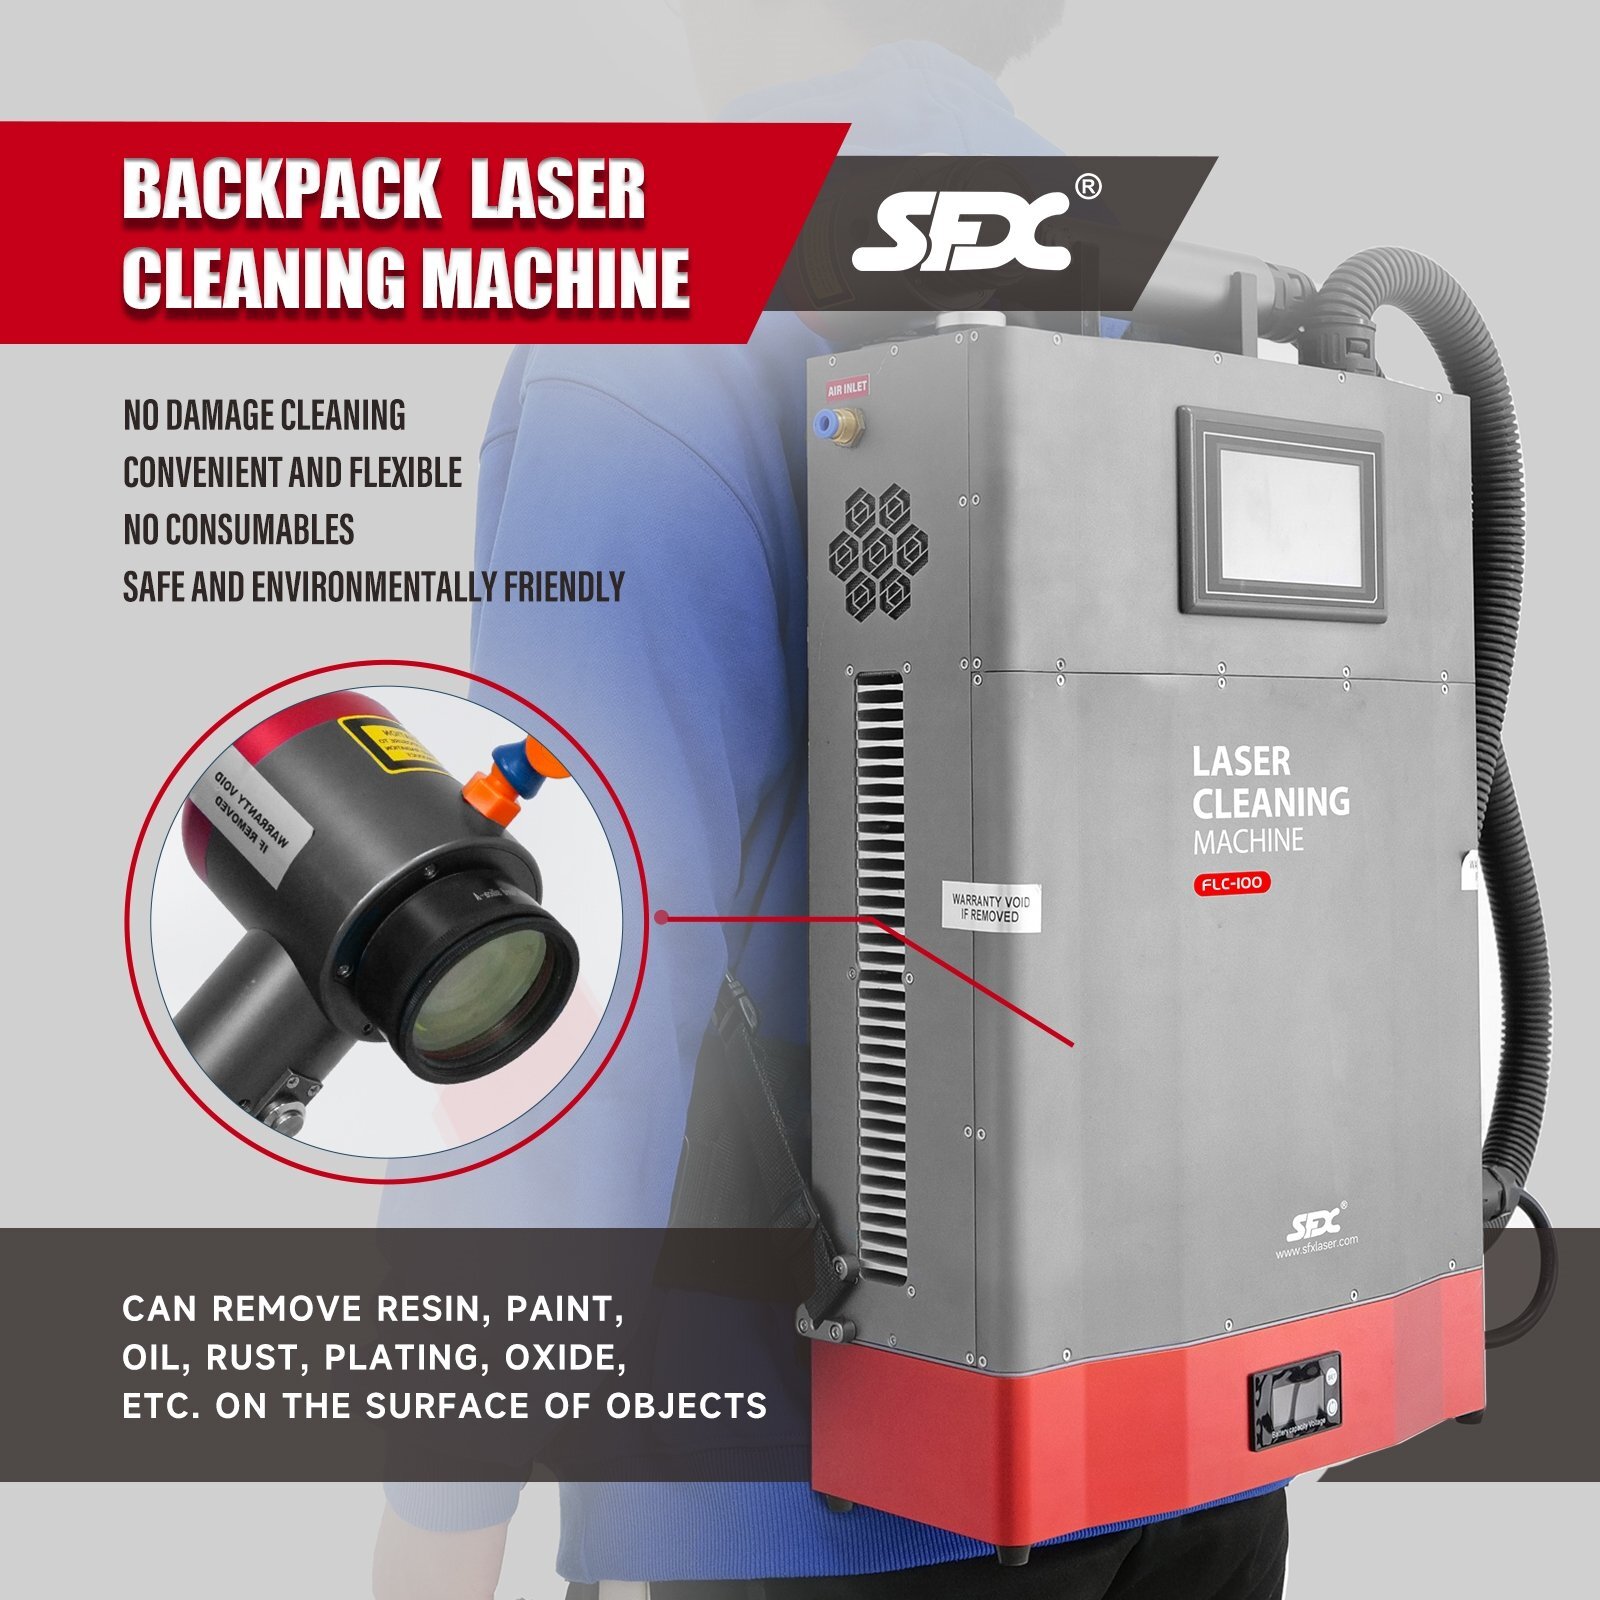  WTTTOOLS 100 W Backpack Laser Rust Removal Laser